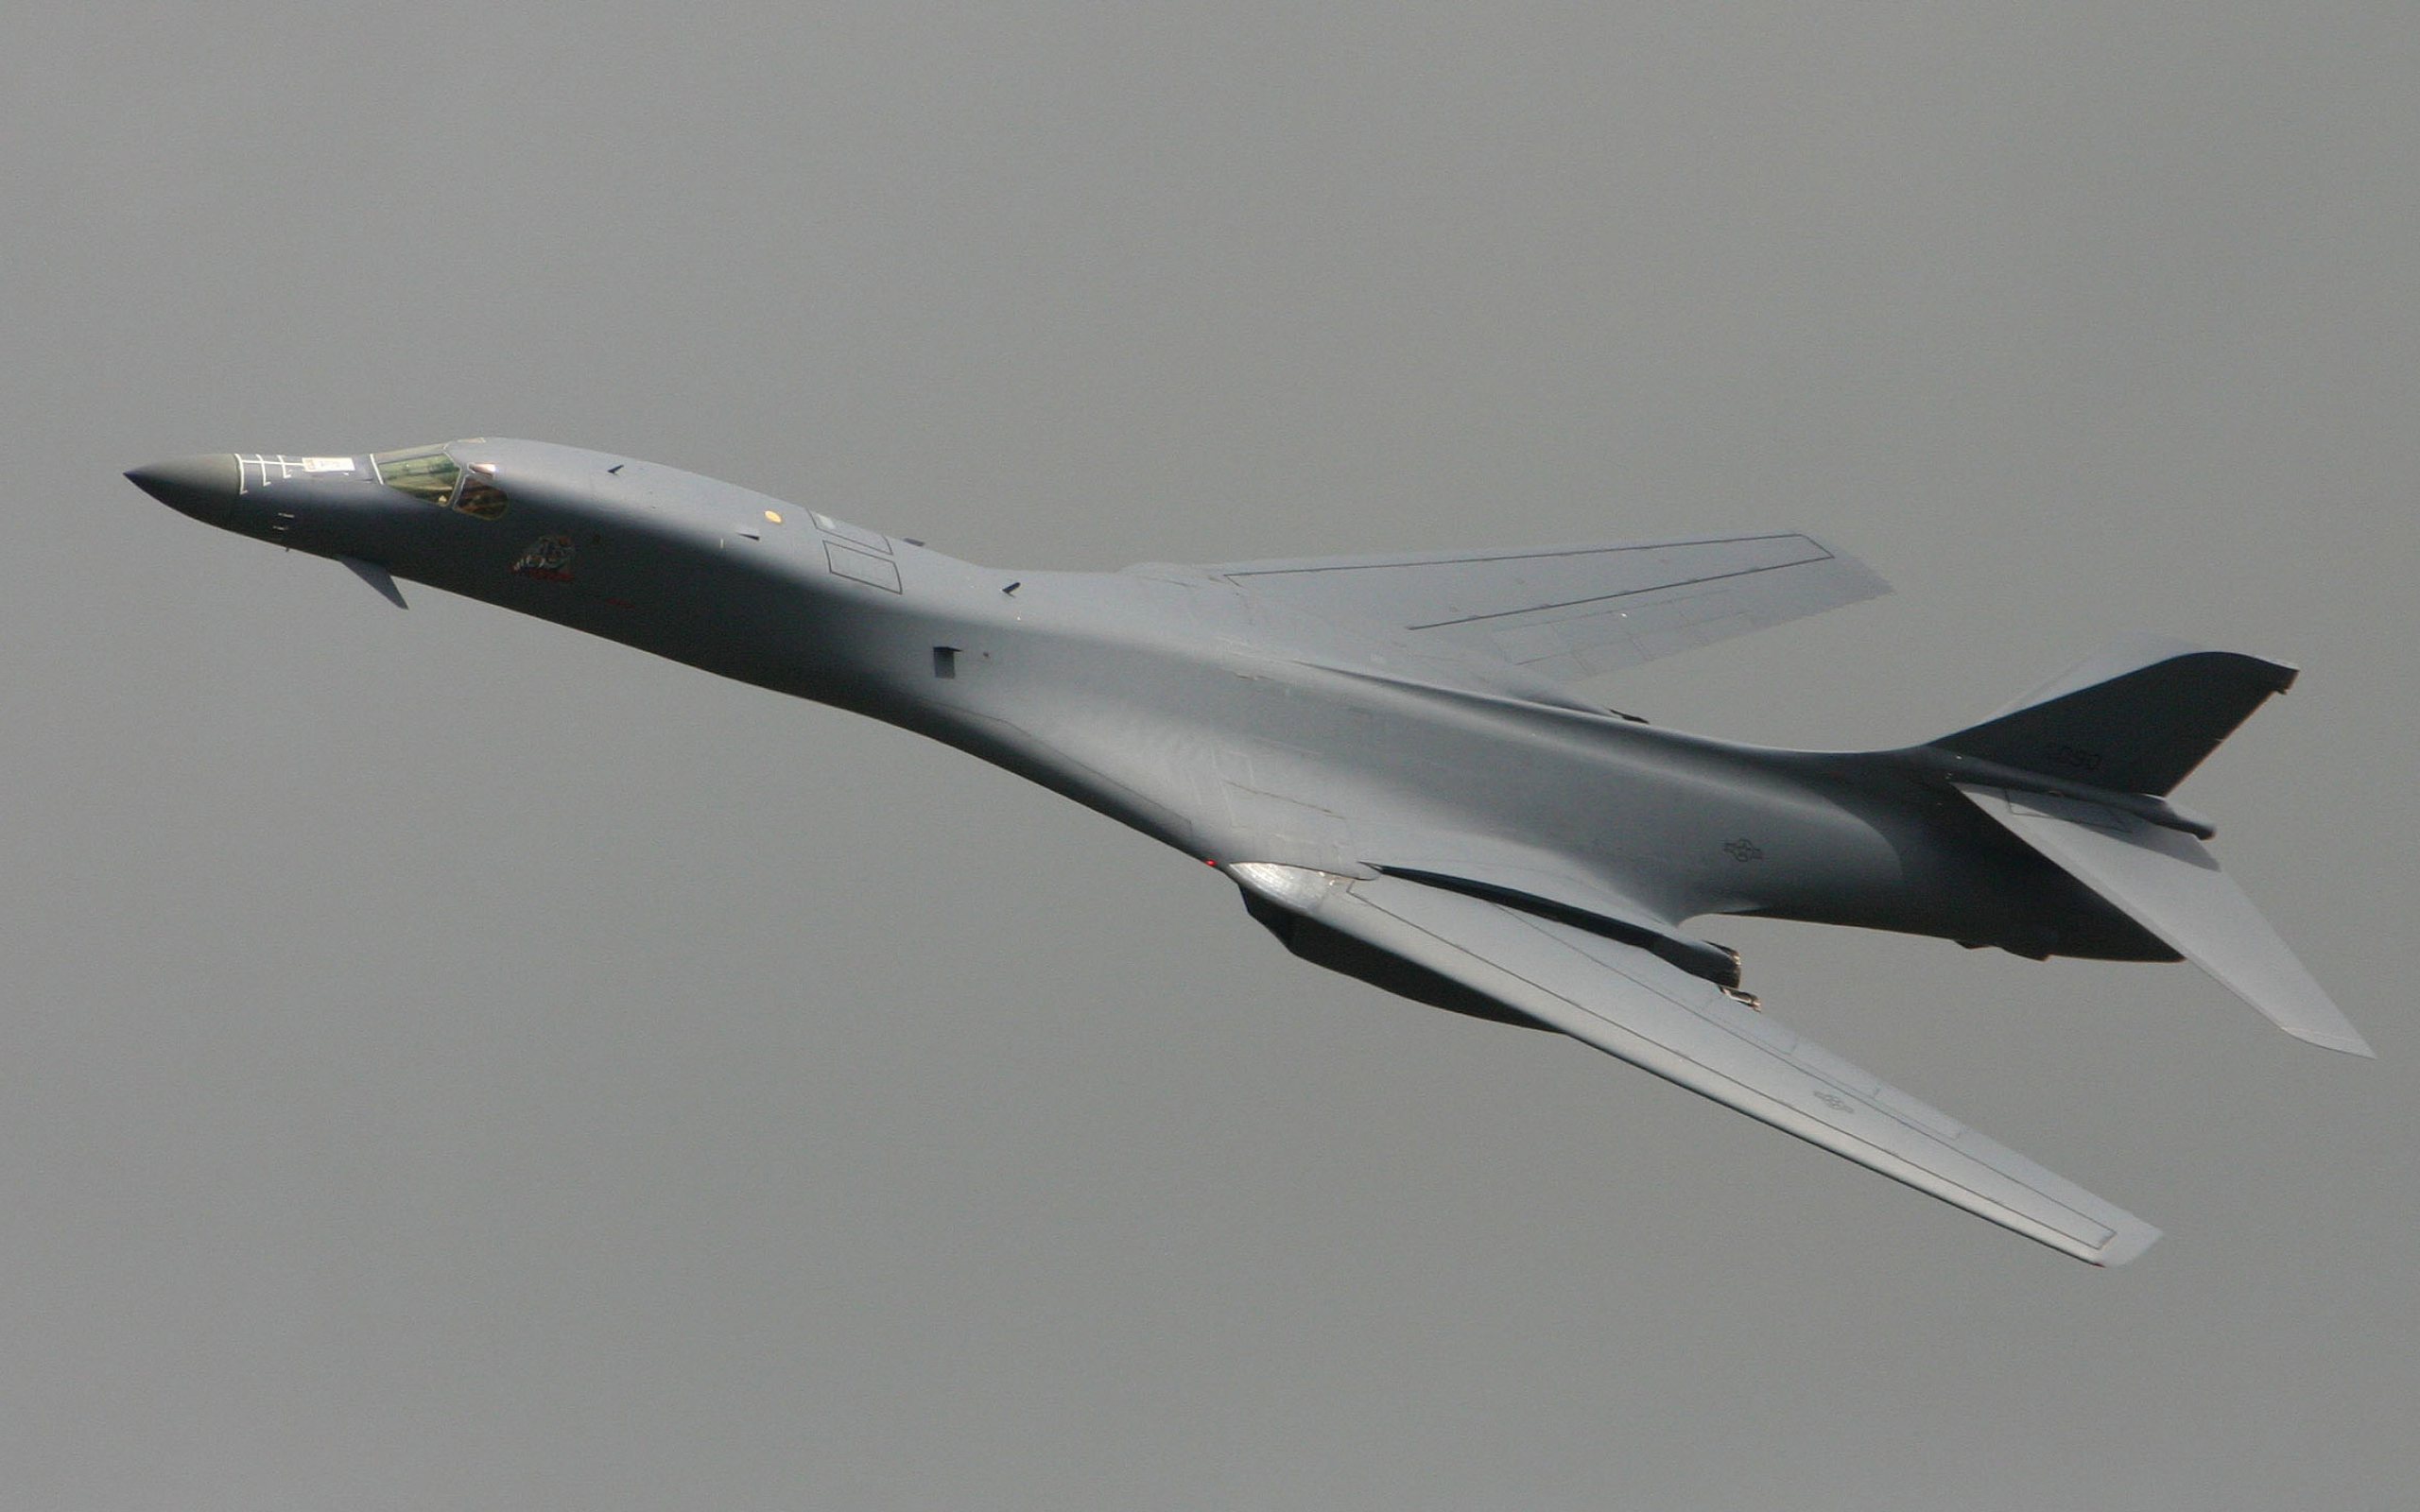 Rockwell B-1 Lancer, Military might, Wallpaper choice, Unmatched power, 2560x1600 HD Desktop